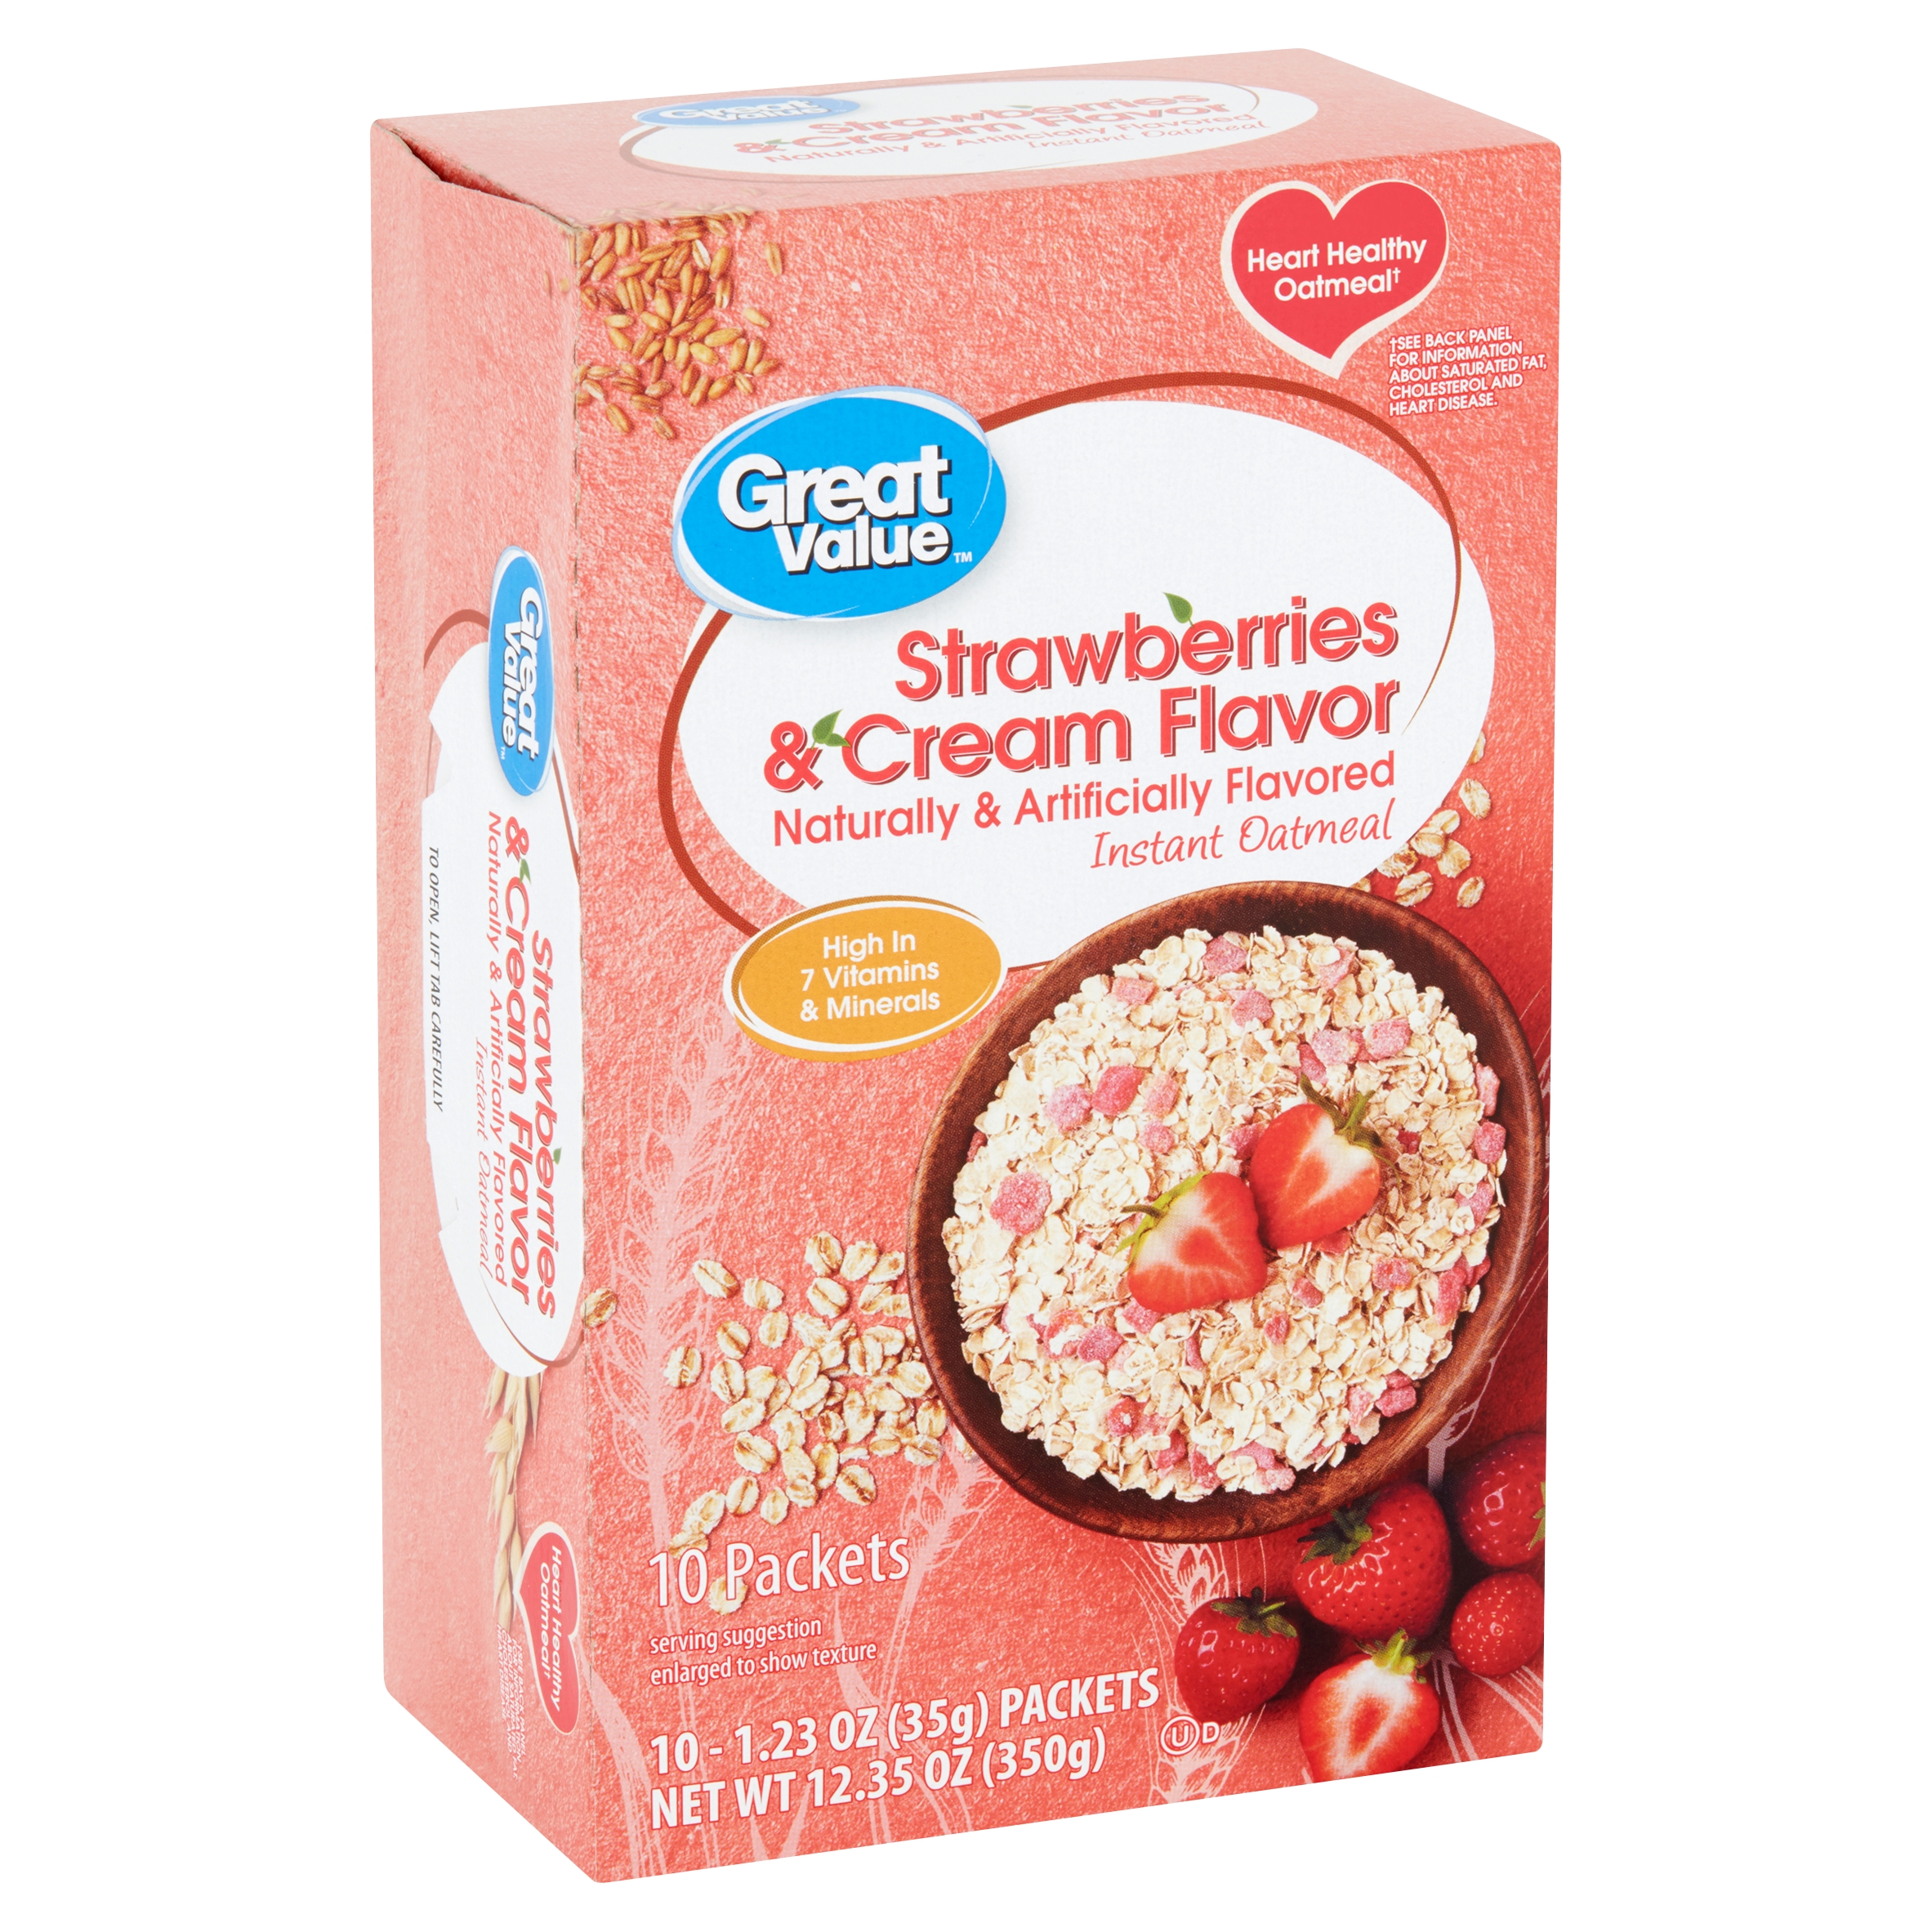 (4 Pack) Great Value Strawberries & Cream Flavor Instant Oatmeal, 1.23 Oz, 10 Count Image